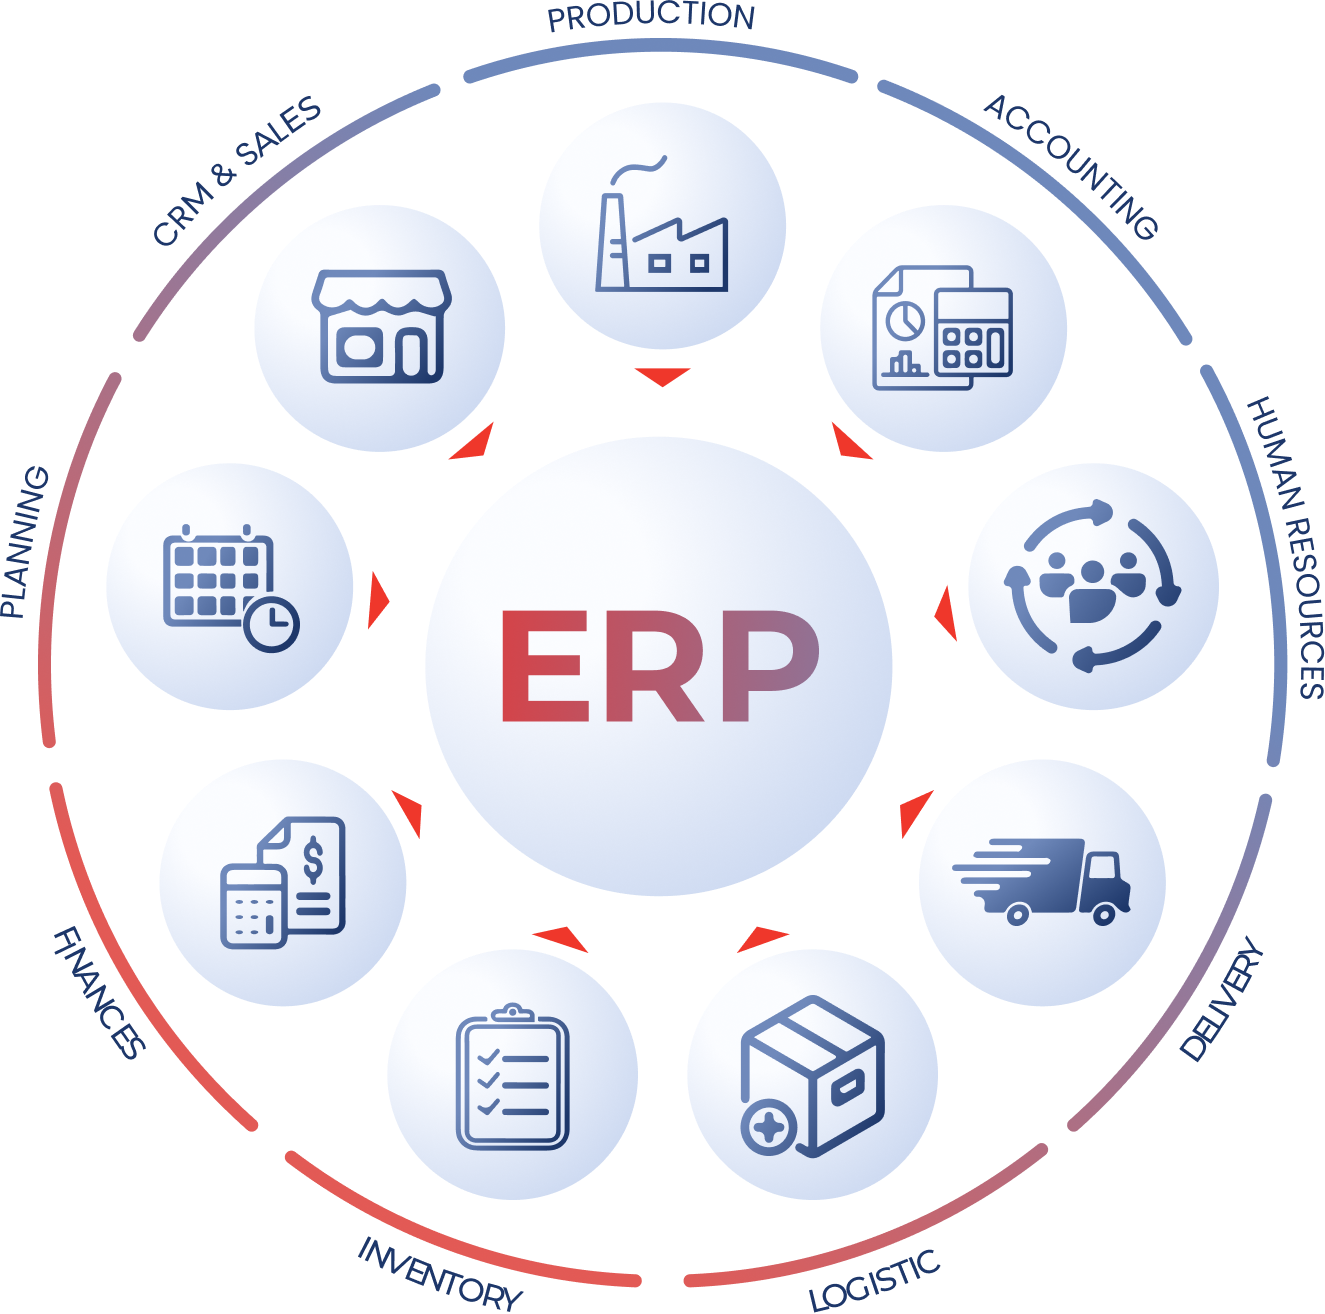 The visualization of an ERP concept -  a wheel with ERP letters in the center and sections around it - human resources, sales, CRM, finances, inventory, distribution, orders, logistics, planning, production, accounting